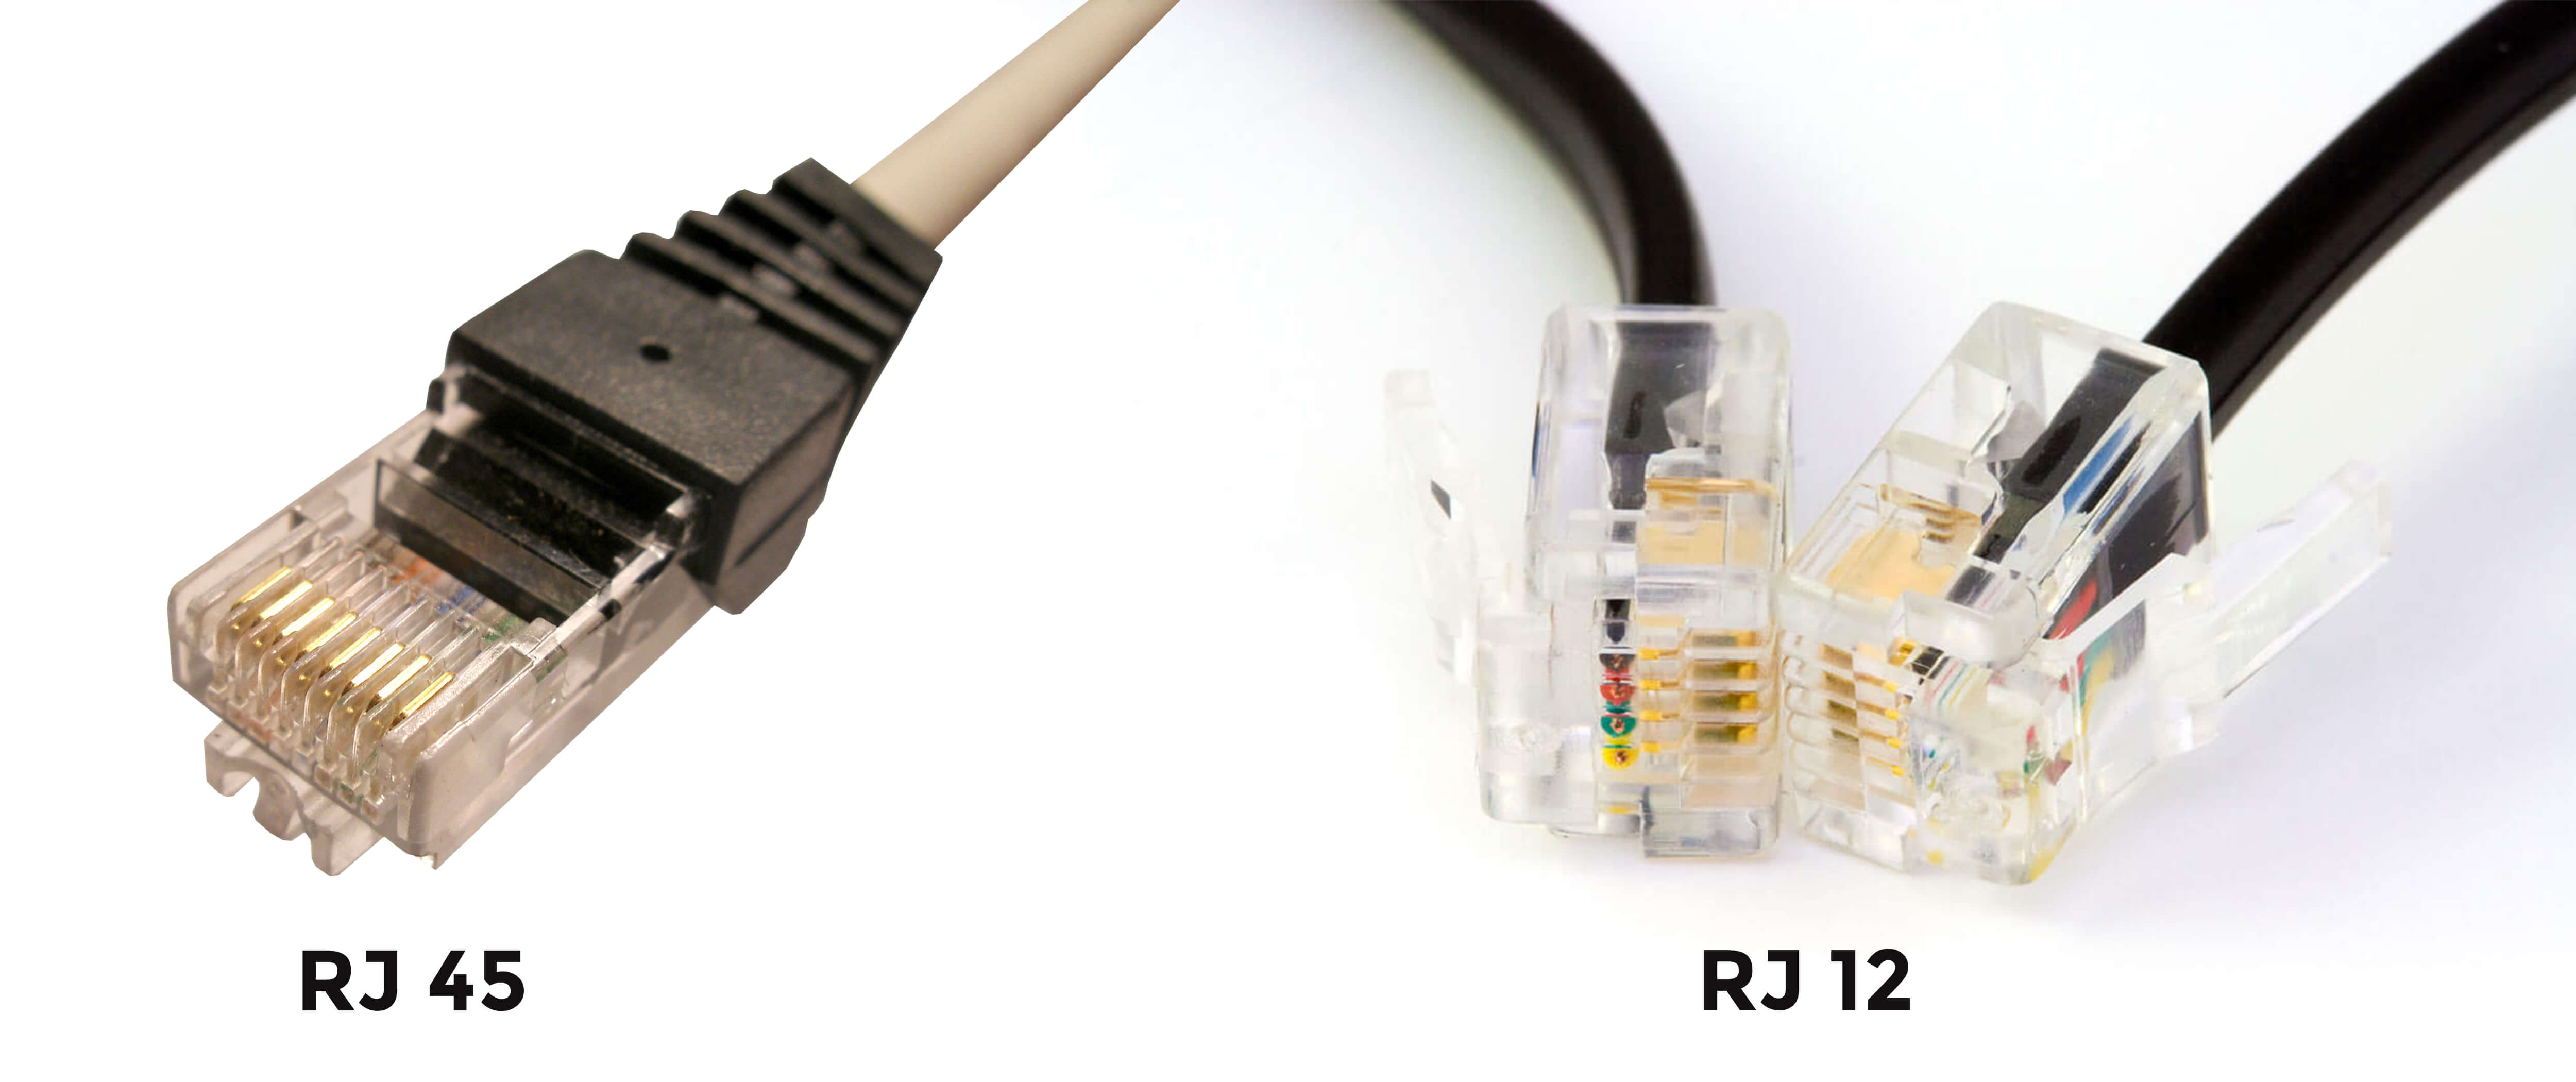 Image of an RJ45 and RJ12 cable